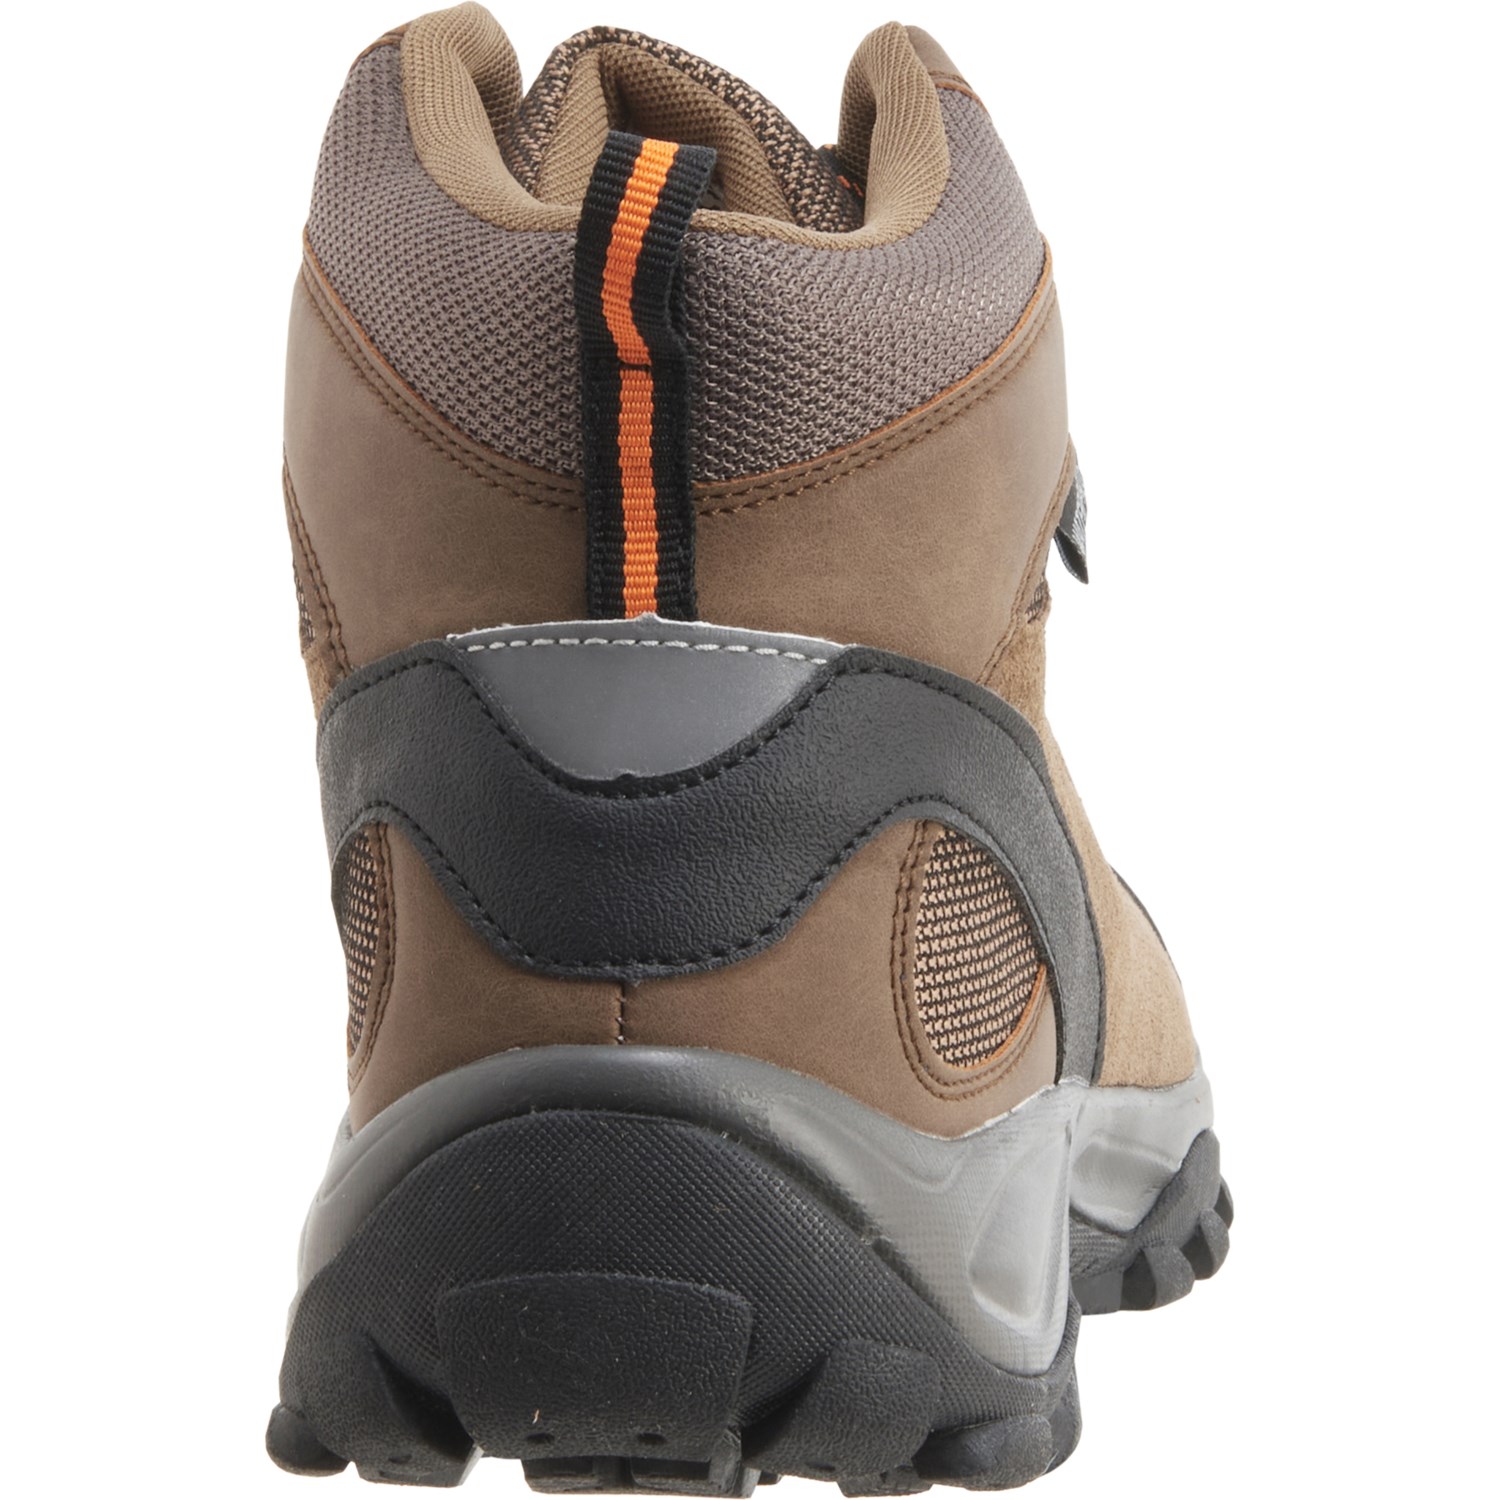 Pacific Mountain Boulder Mid Hiking Boots (For Men) - Save 25%